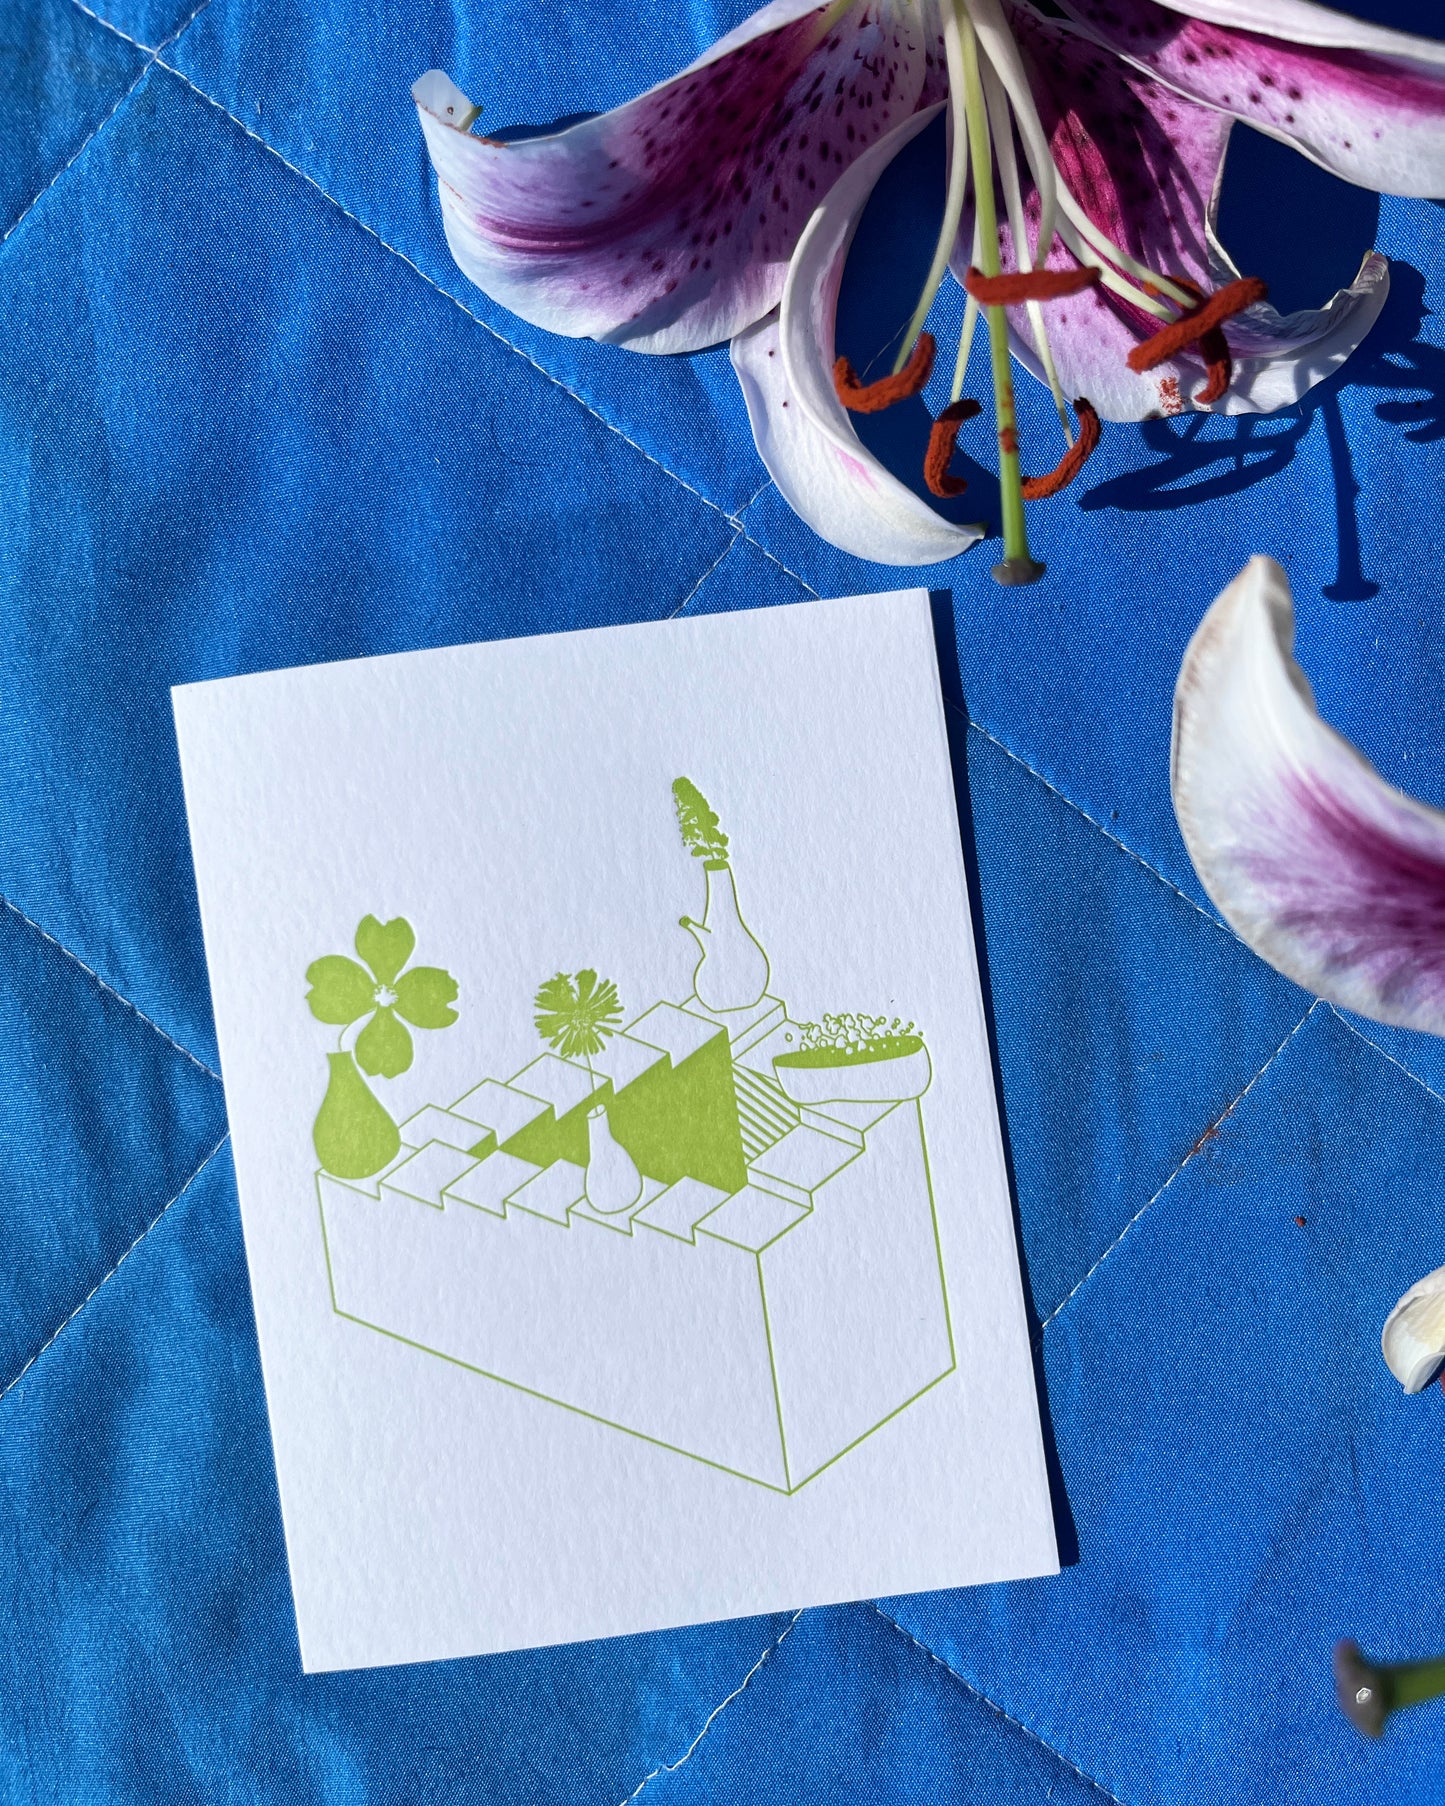 Green Bloom Stairs Card, David Bernabo x Meshwork, #162 (limited edition)